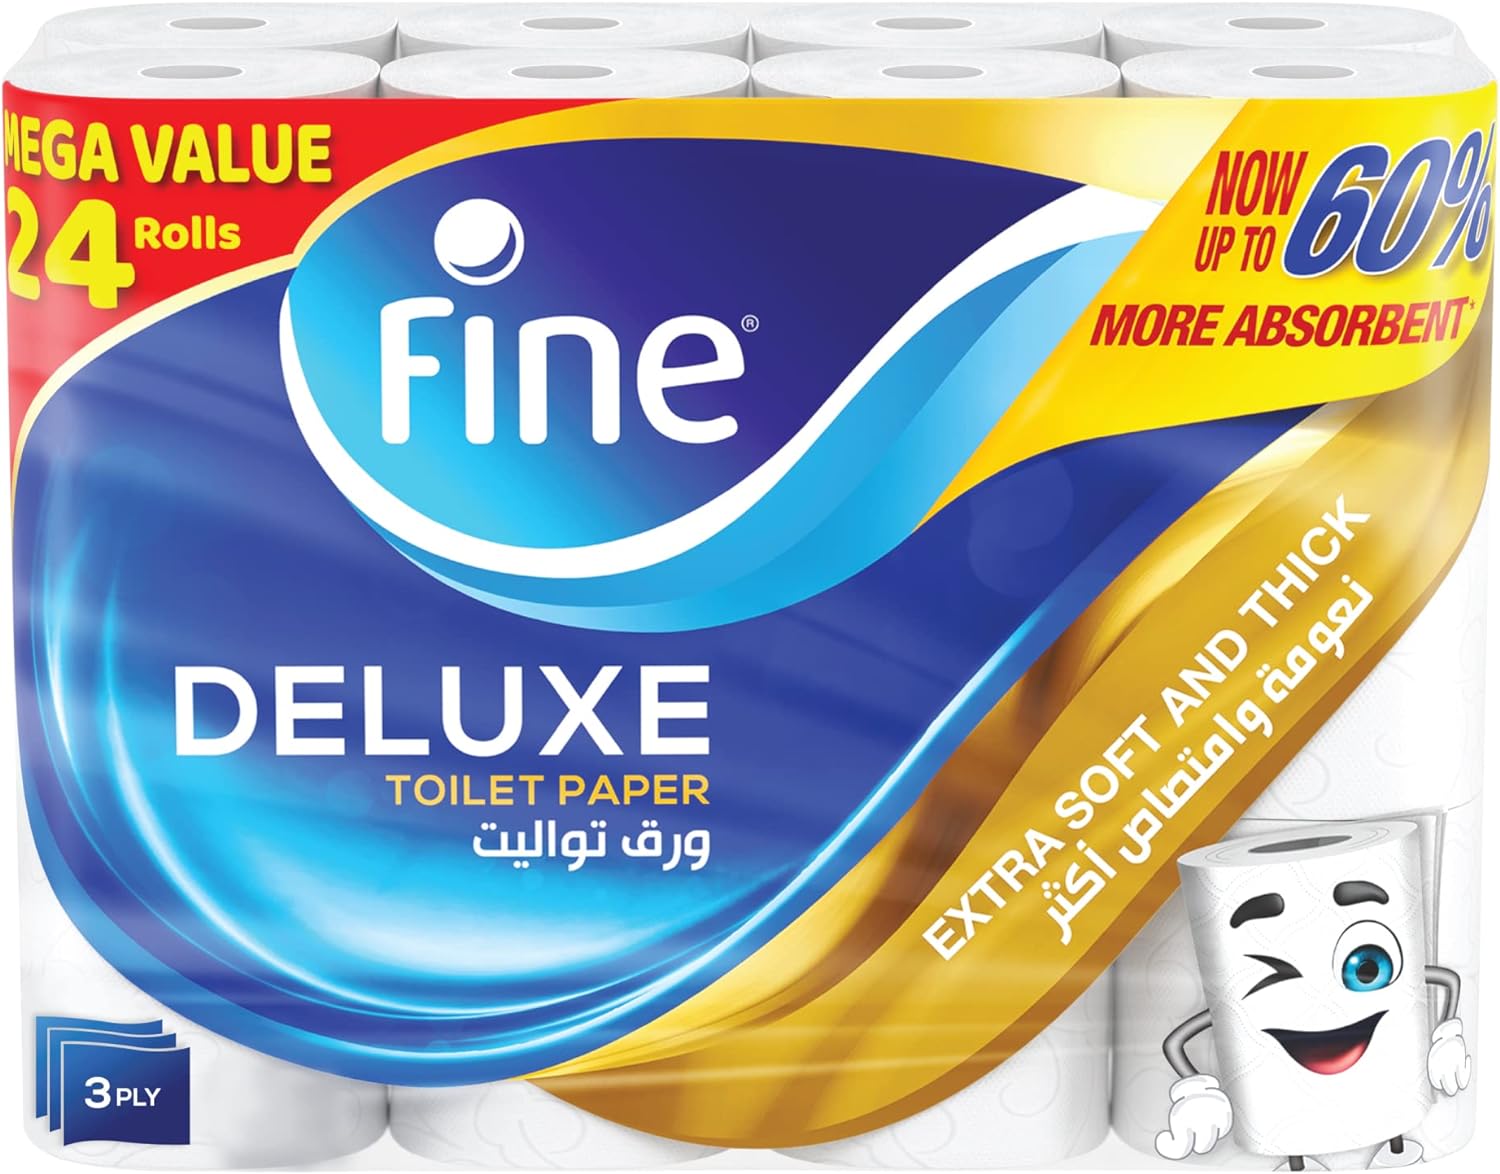 Fine Deluxe, Highly Absorbent, Sterilized, Soft & Strong, Flushable Toilet Paper, 3 Plies, Pack of 24 Rolls. New & Improved